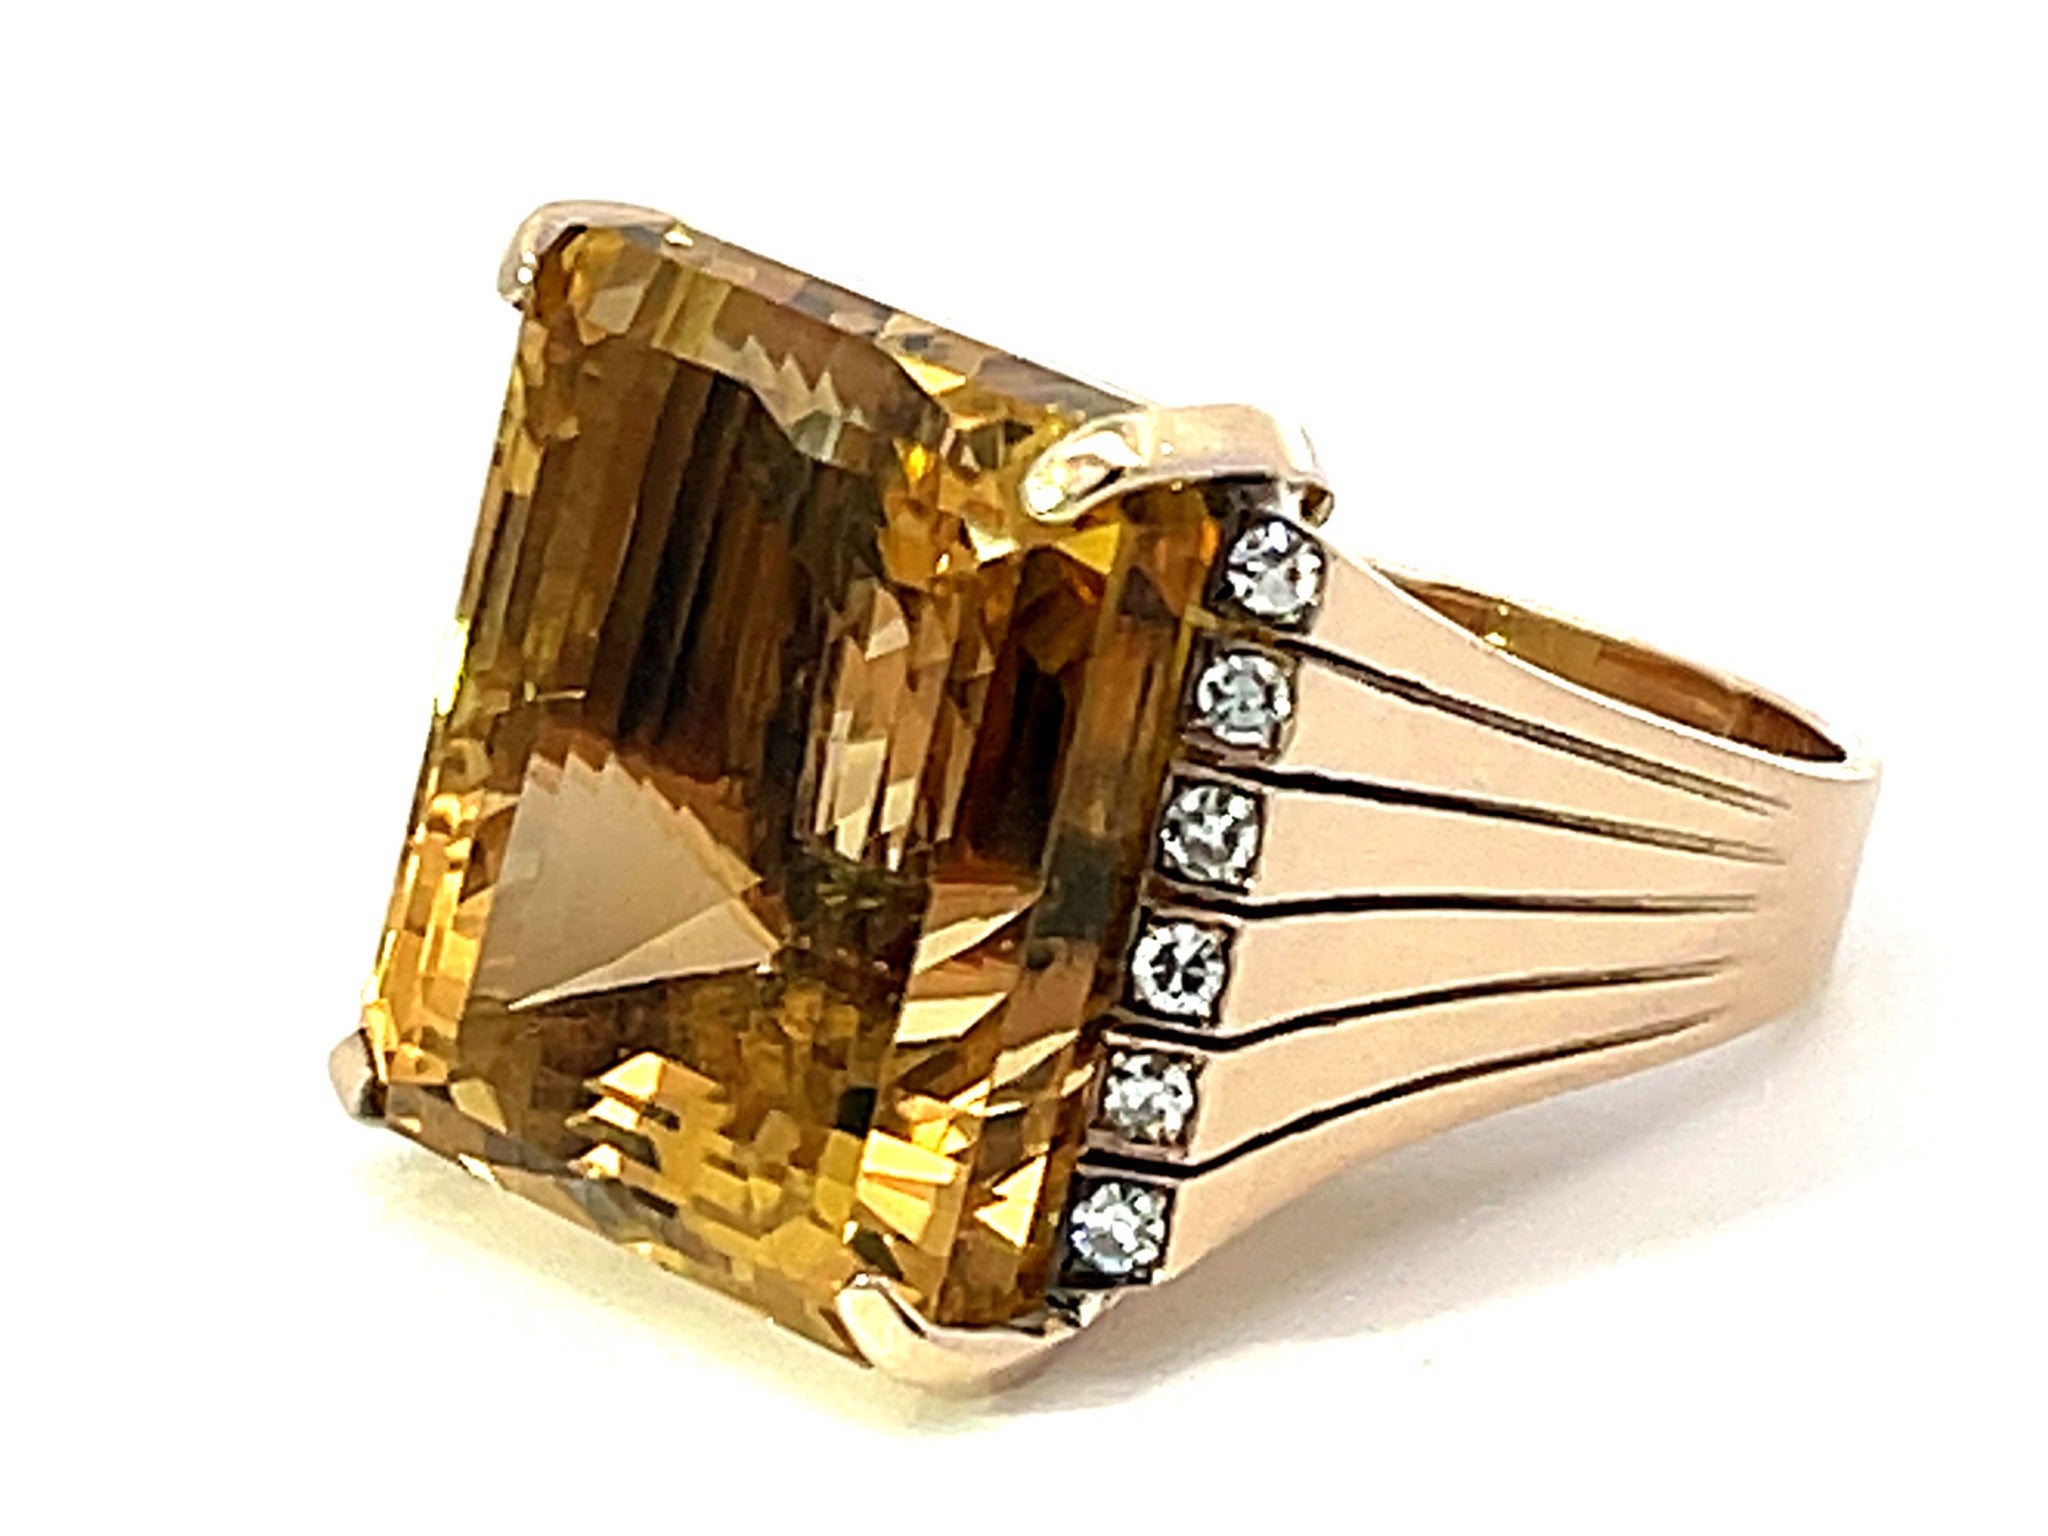 Large 43 Carat Yellow Topaz Emerald Step Cut and Diamond Ring in 14k Yellow Gold